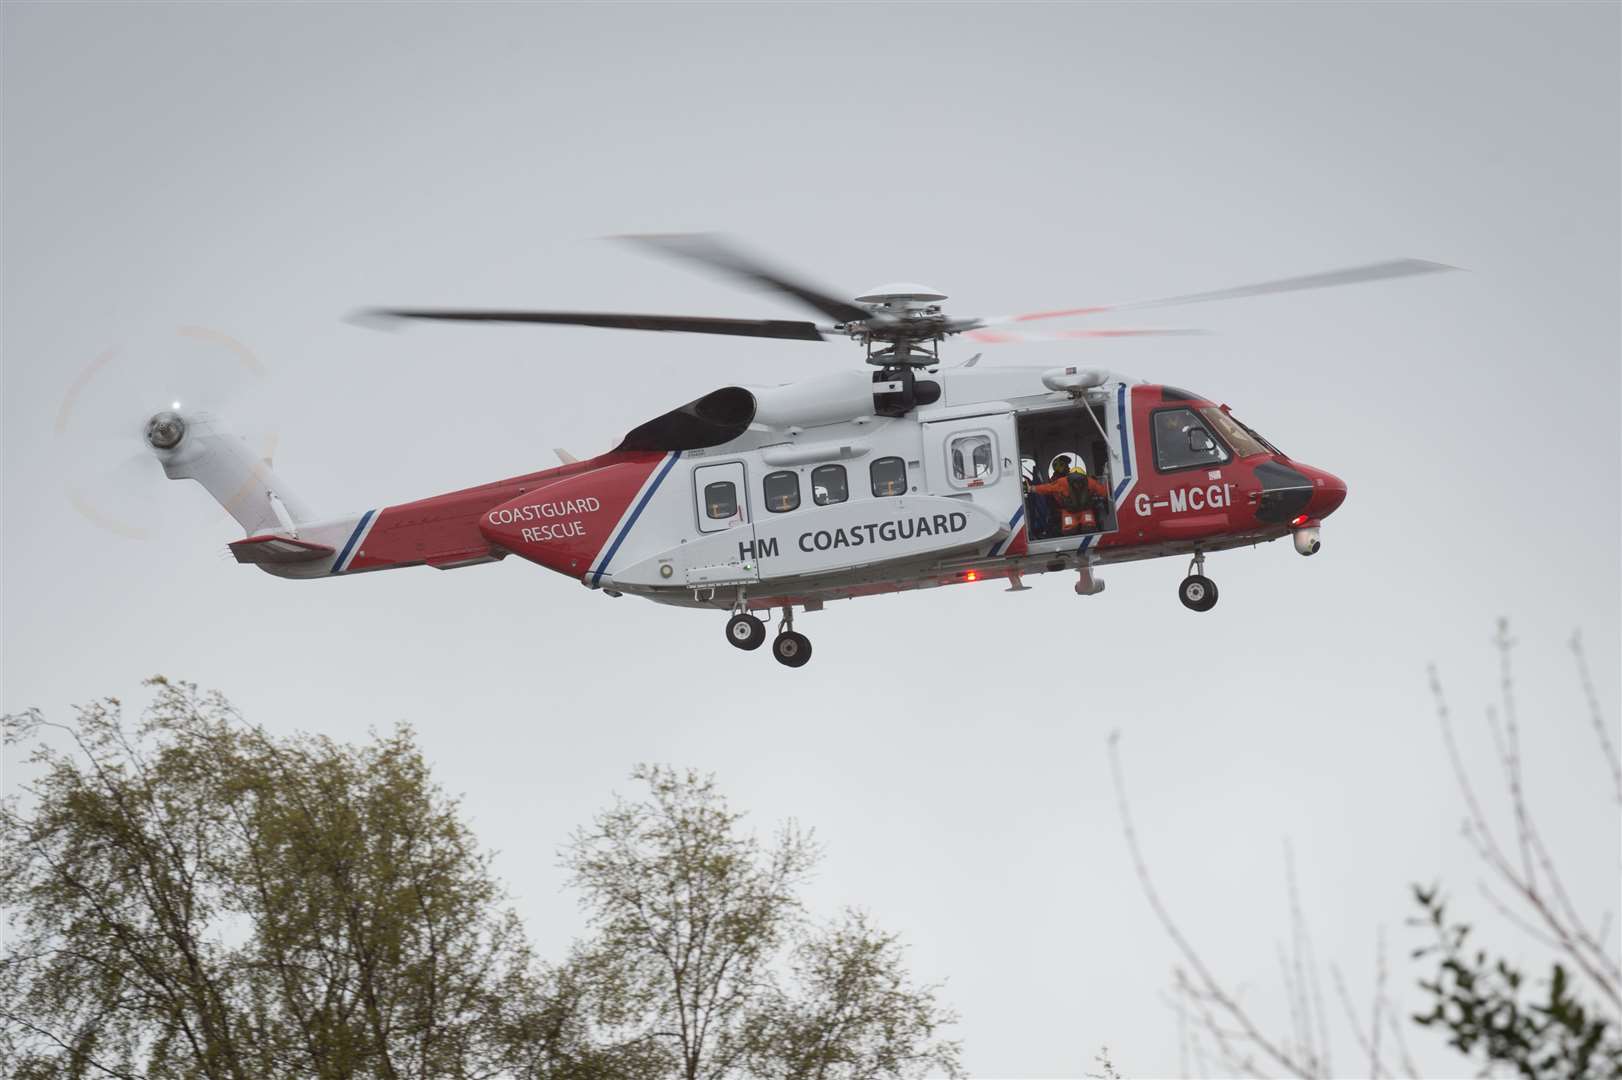 A Coastguard helicopter was involved in the search.